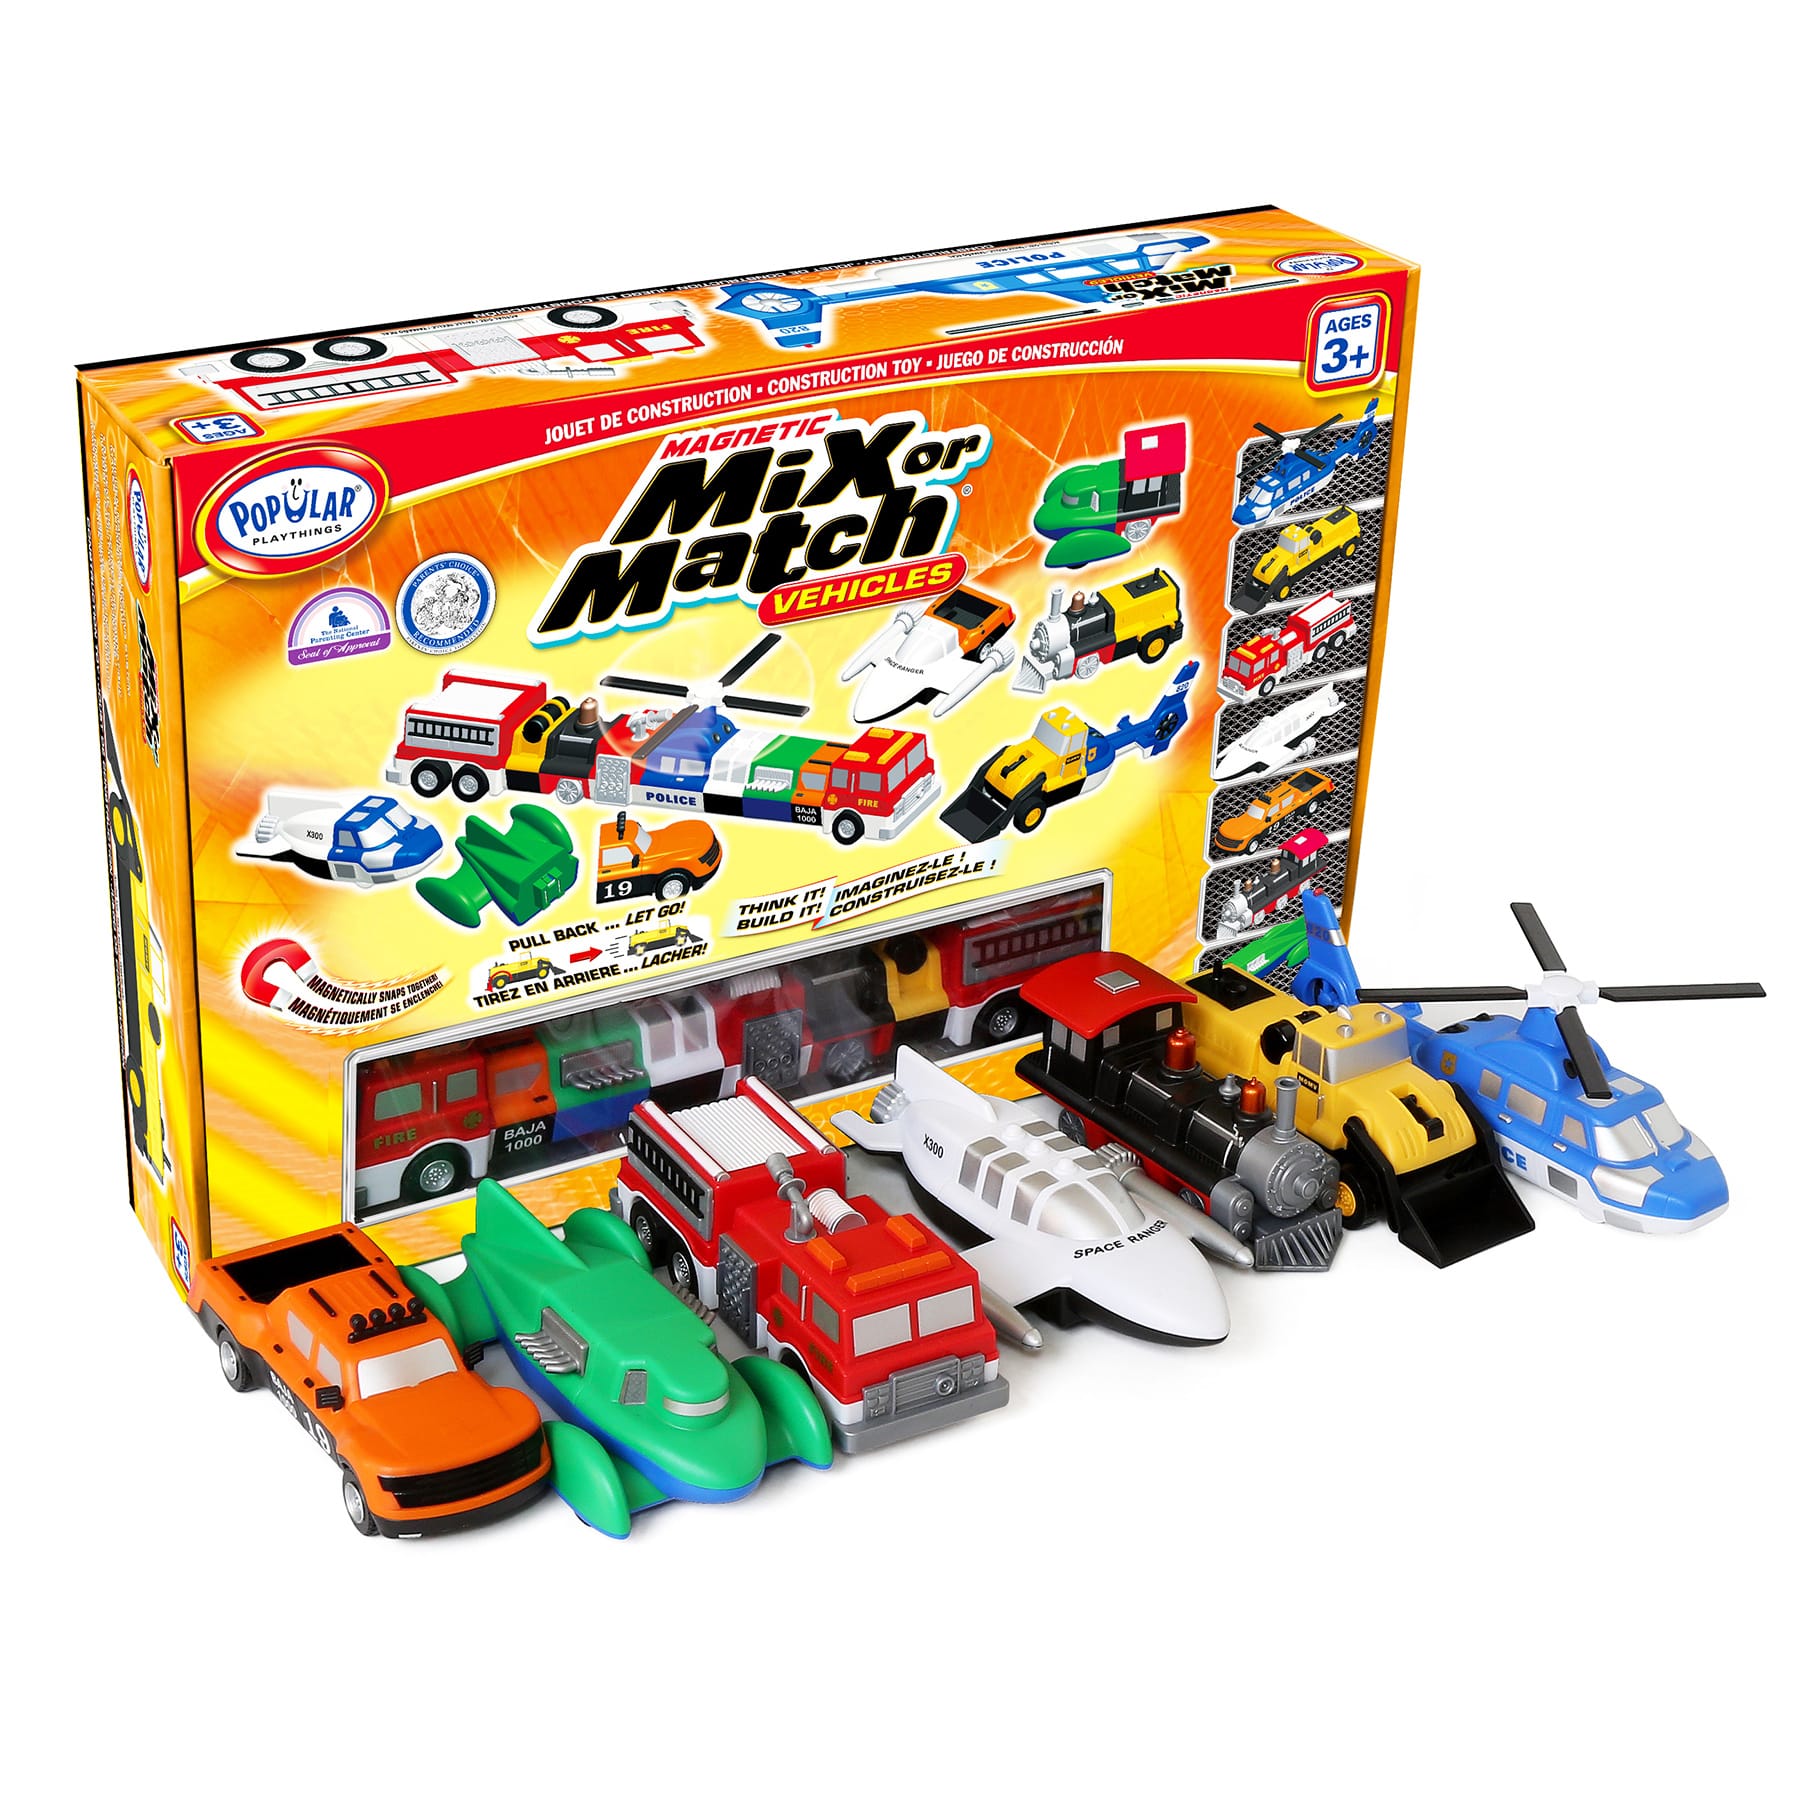 Popular Playthings&#xAE; Magnetic Mix or Match&#xAE; Deluxe 2 Vehicles Play Set